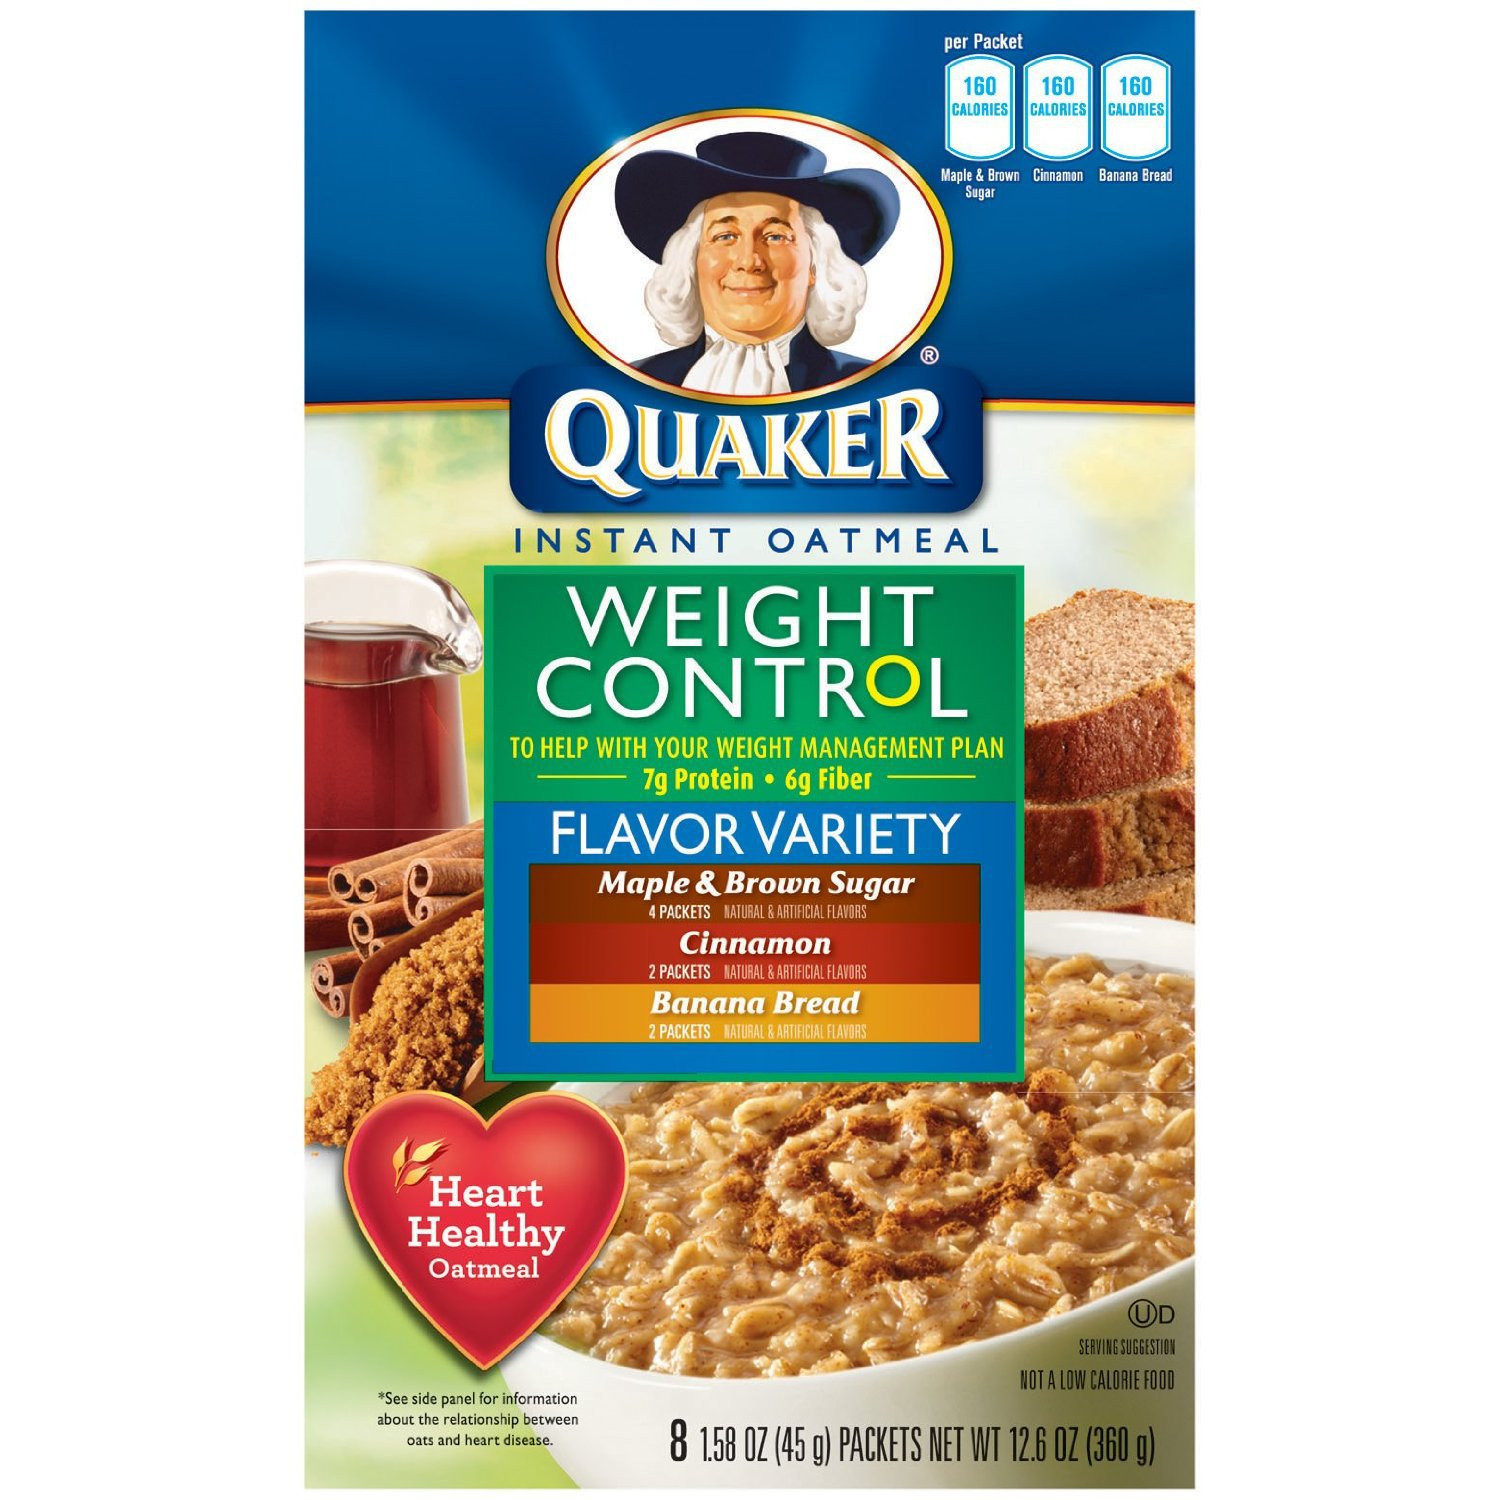 Quaker Oats Weight Control
 Quaker Instant Oatmeal Weight Control Flavor Variety Pack